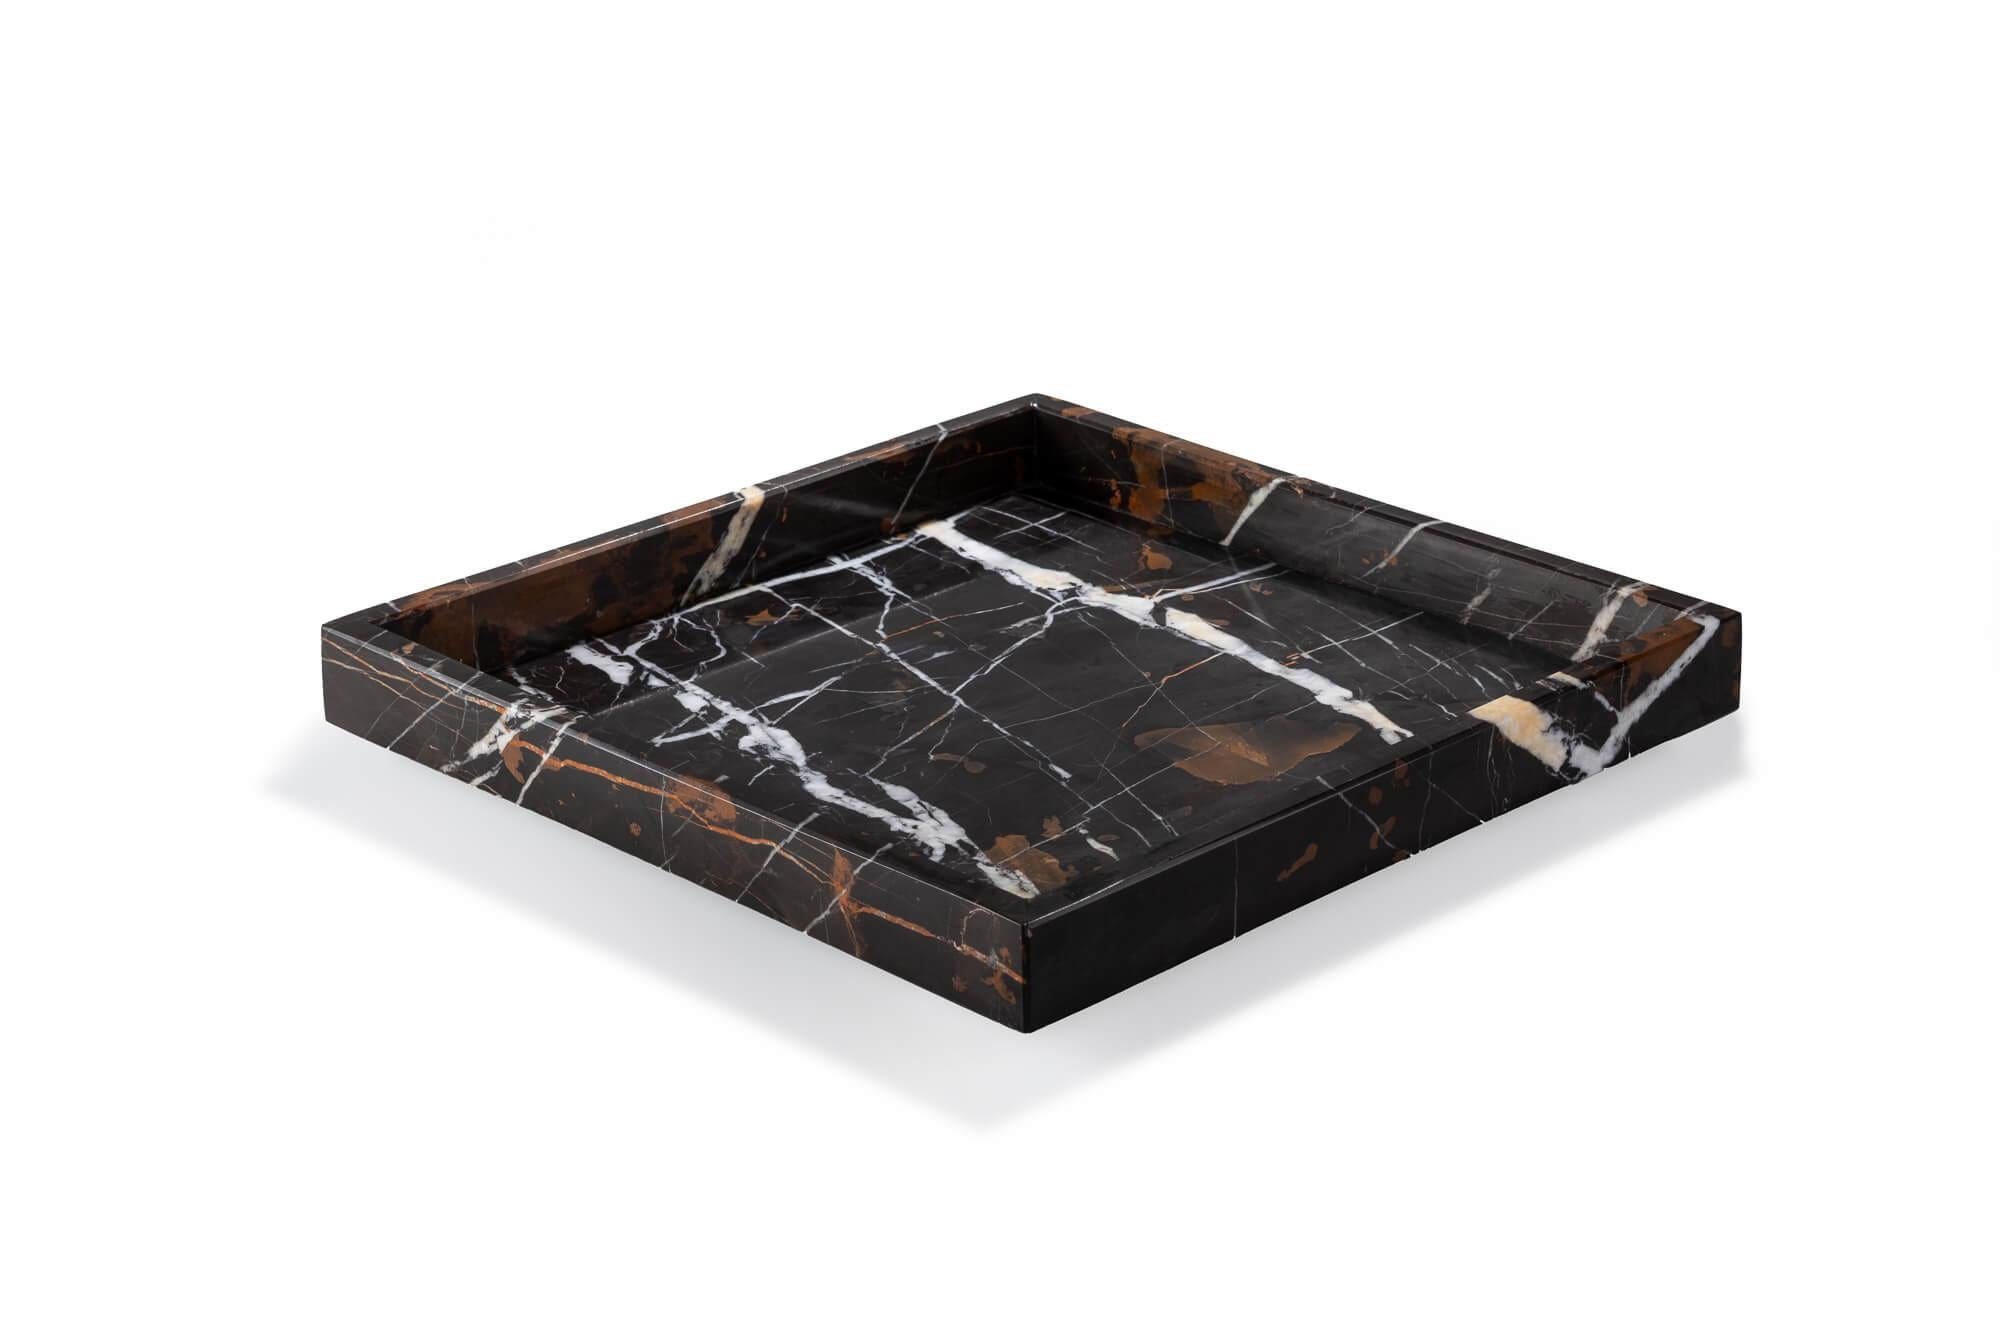 Designed to elegantly complement exclusive settings and stylish interiors, this square tray adds sophistication and elegance wherever it's placed. Integrated with a thin bottom plinth for easy manipulation, it embodies practicality and timeless